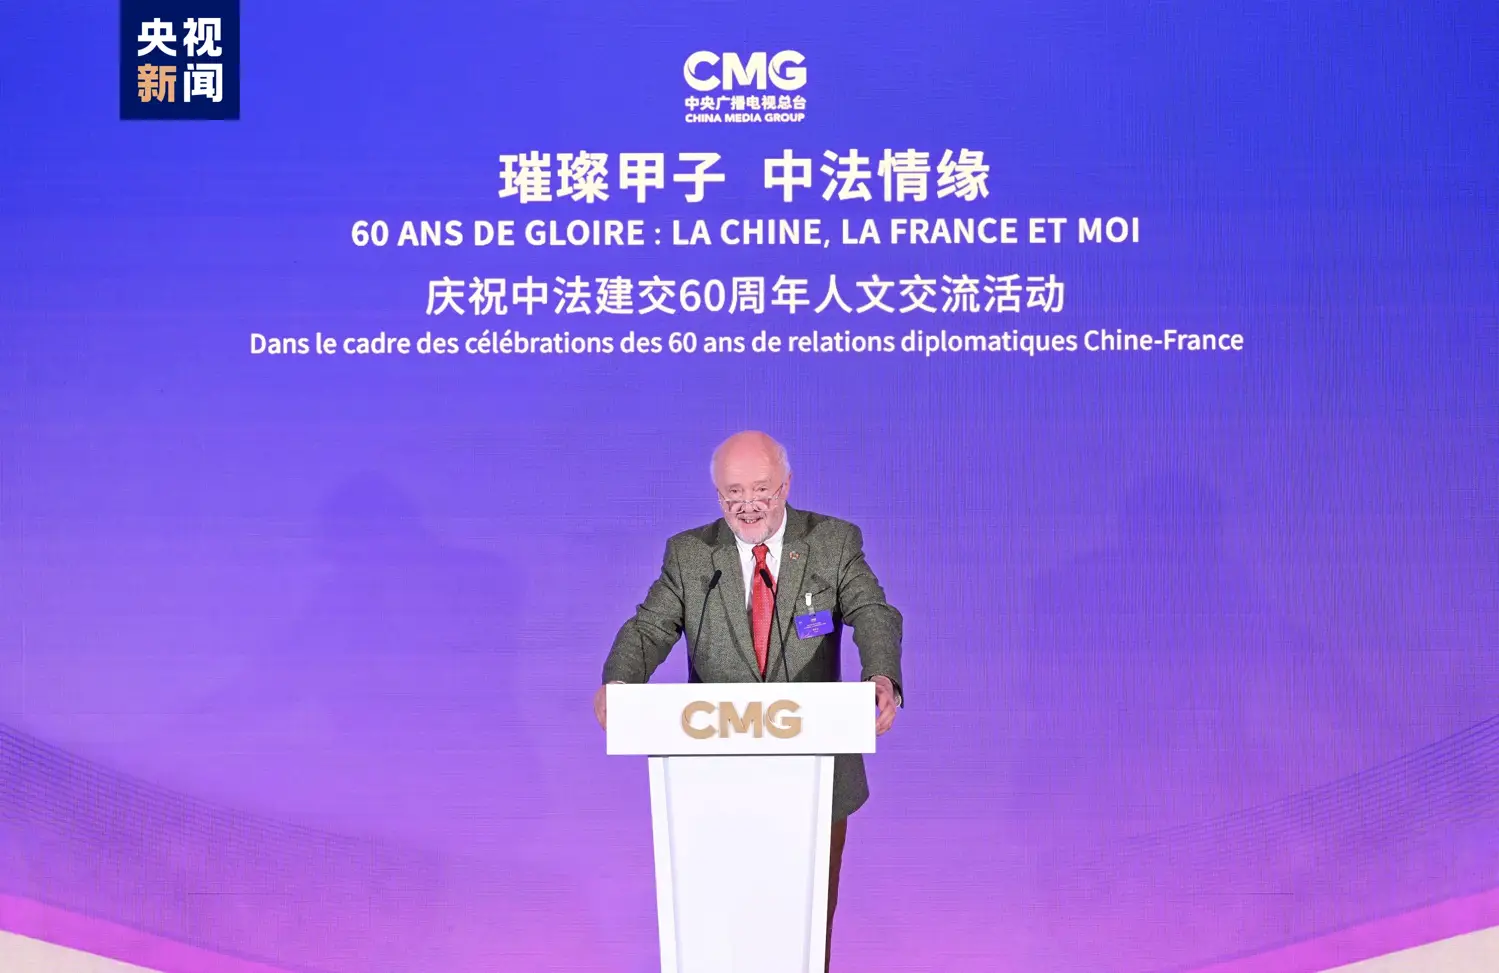 "Ping "Speech" to Near People - Xi Jinping's Favorite Allusions" was broadcast on French mainstream media